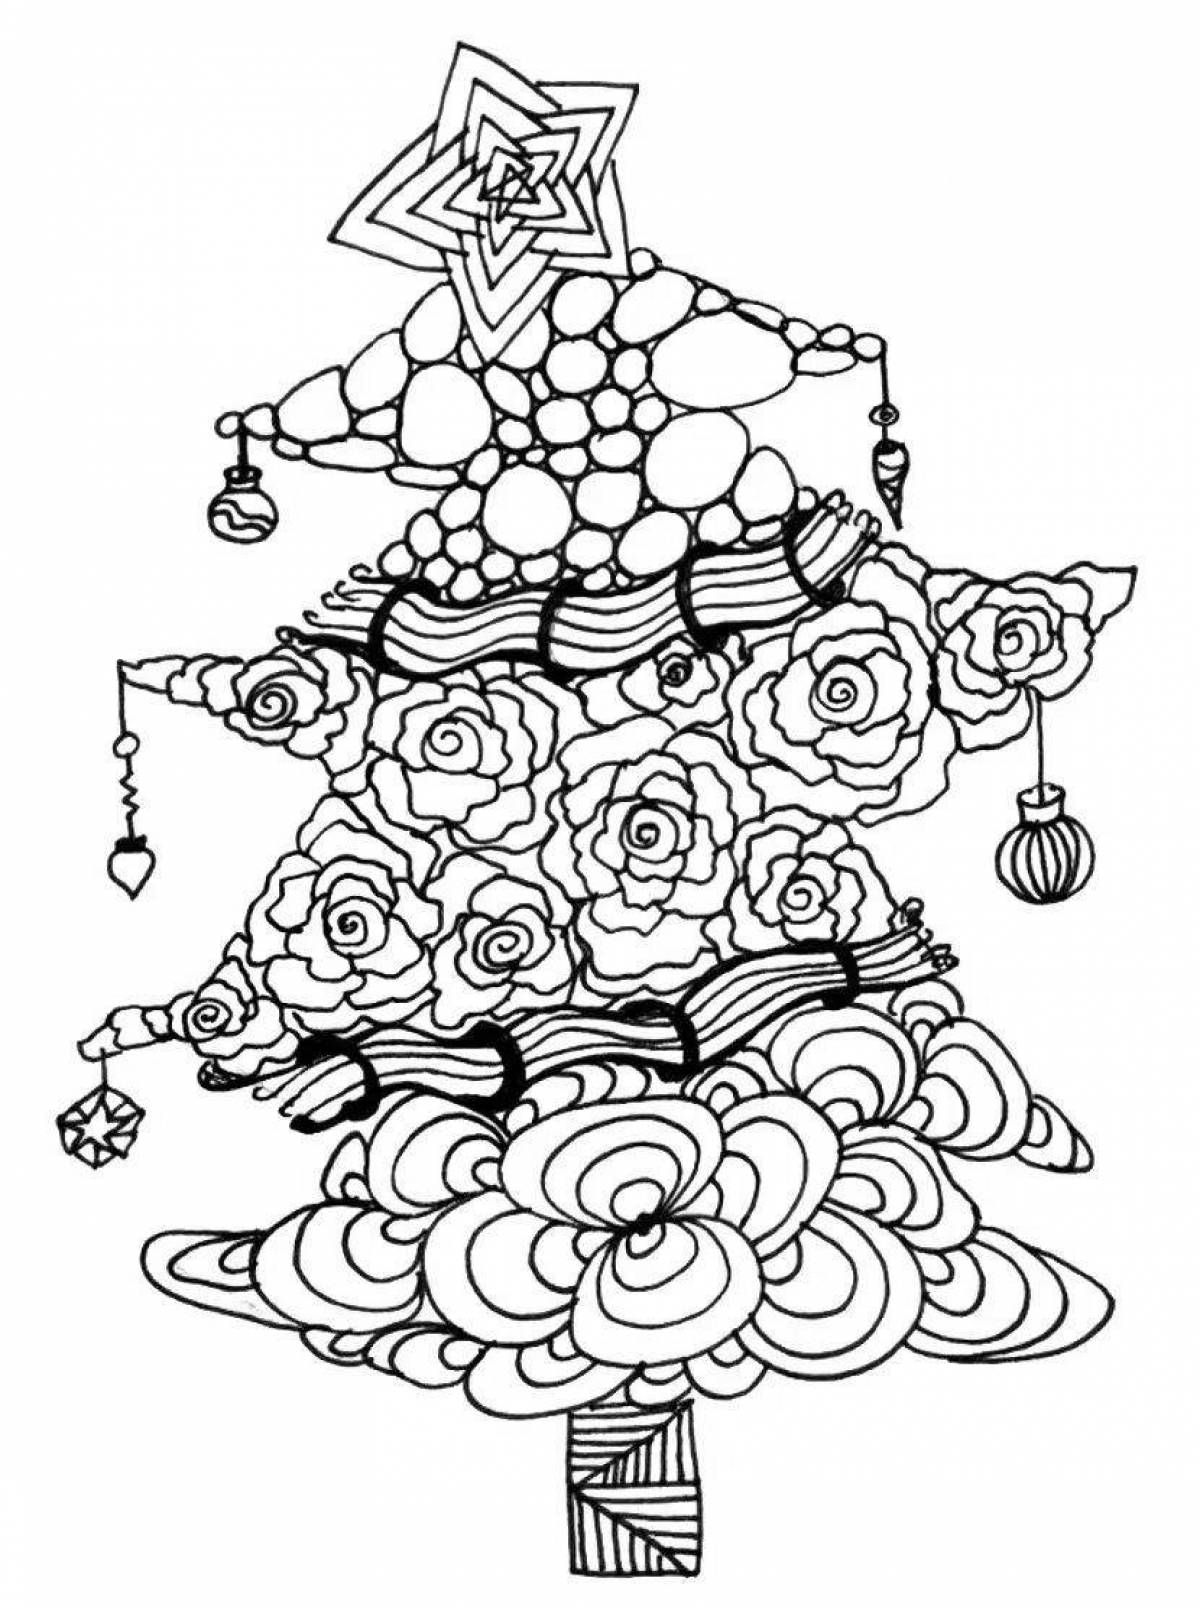 Glowing giant tree coloring page